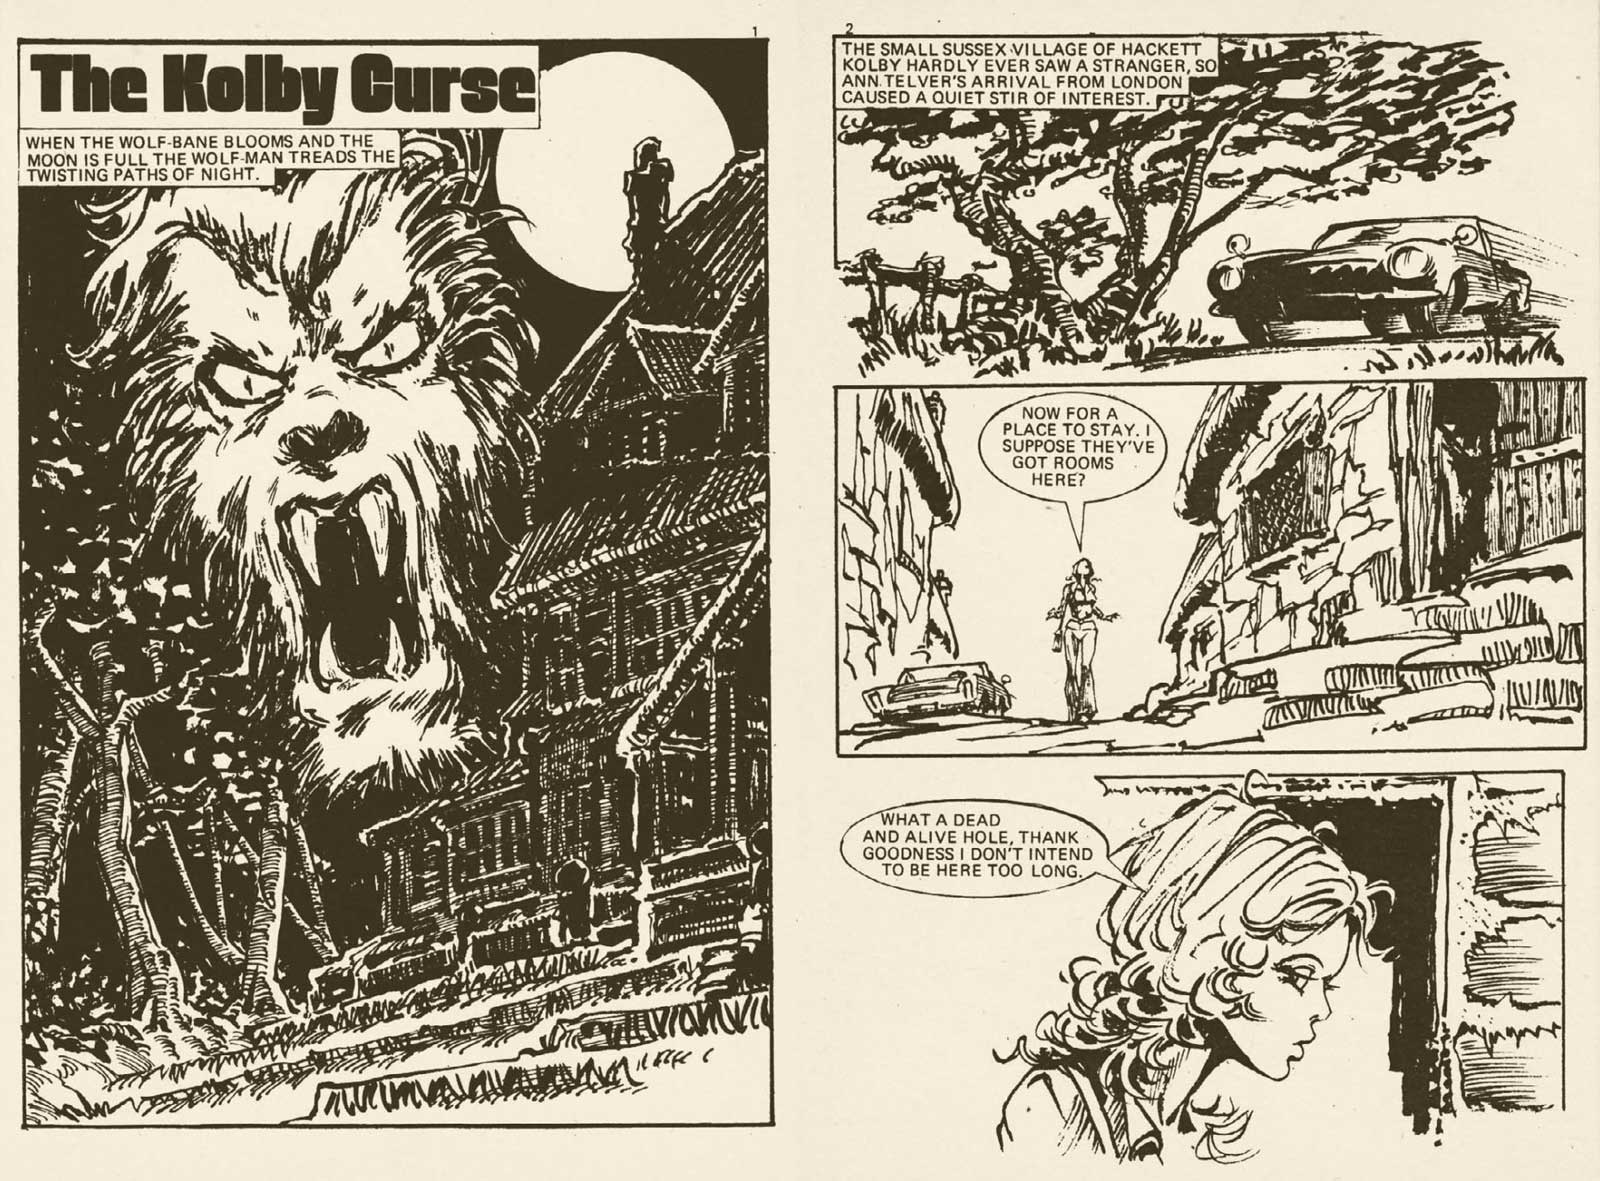 Interior art by Ian Gibson on Pocket Chiller Library 72 - The Kolby Curse